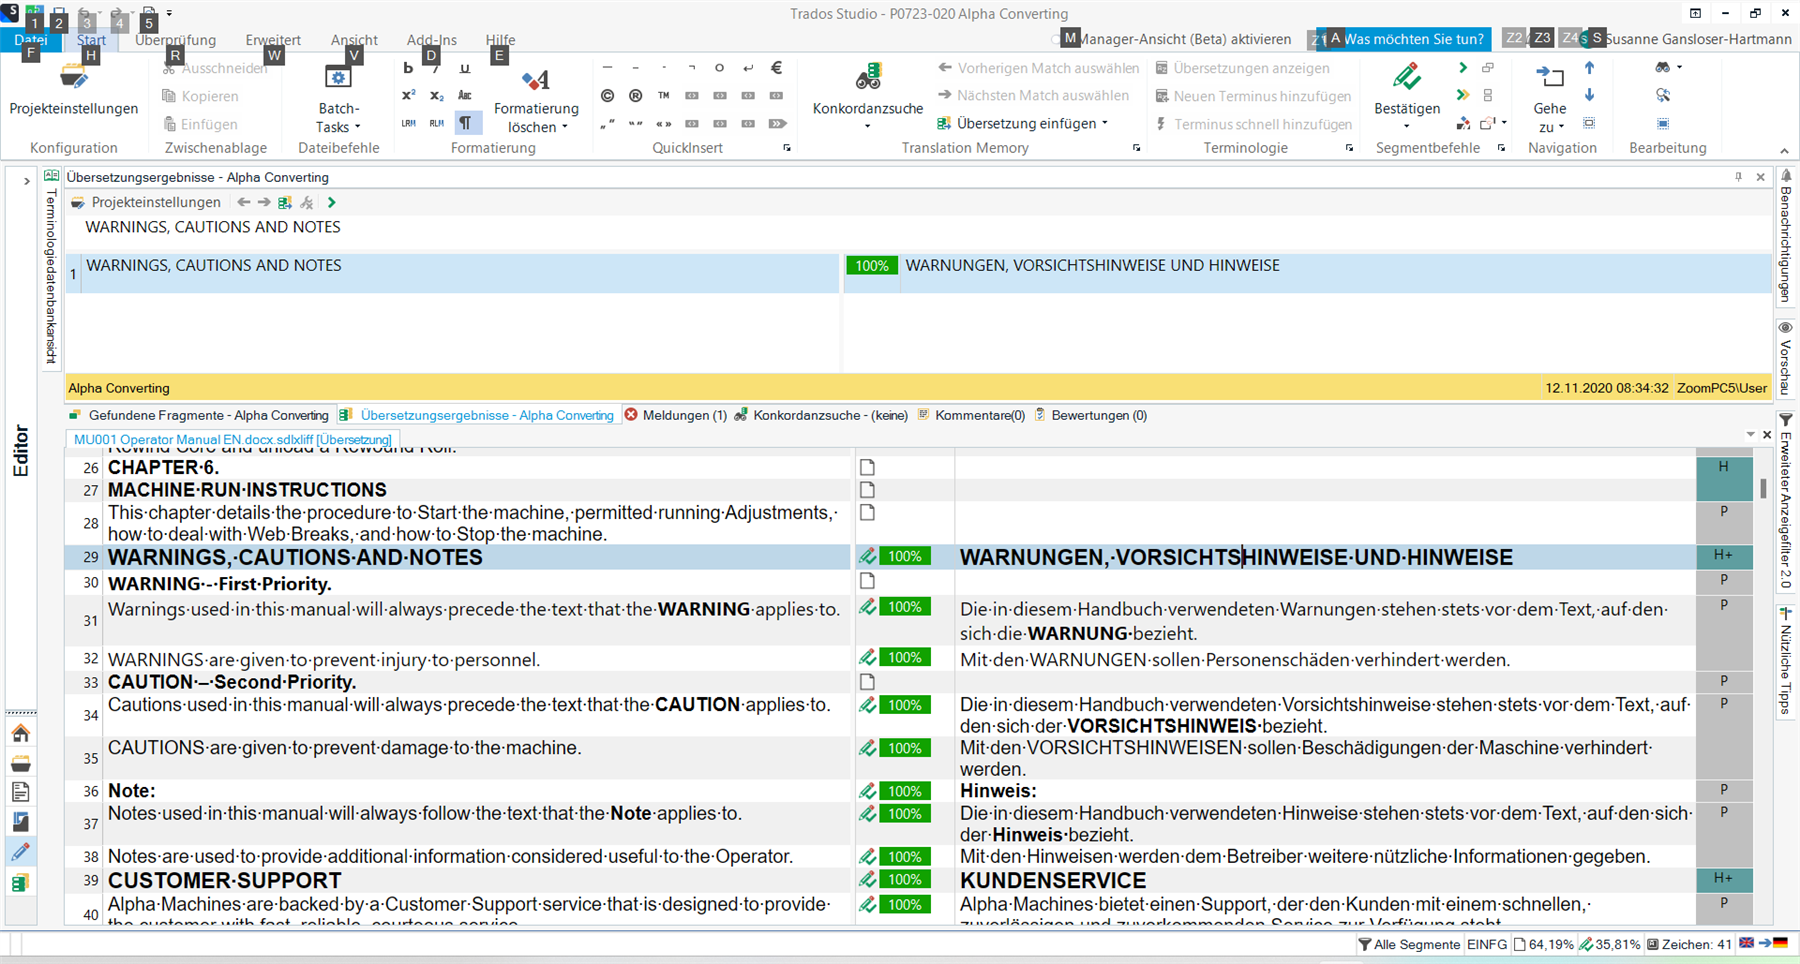 Screenshot of Trados Studio interface showing a warning message in the translation results pane indicating that Multiterm is lost in Studio 2022 update.